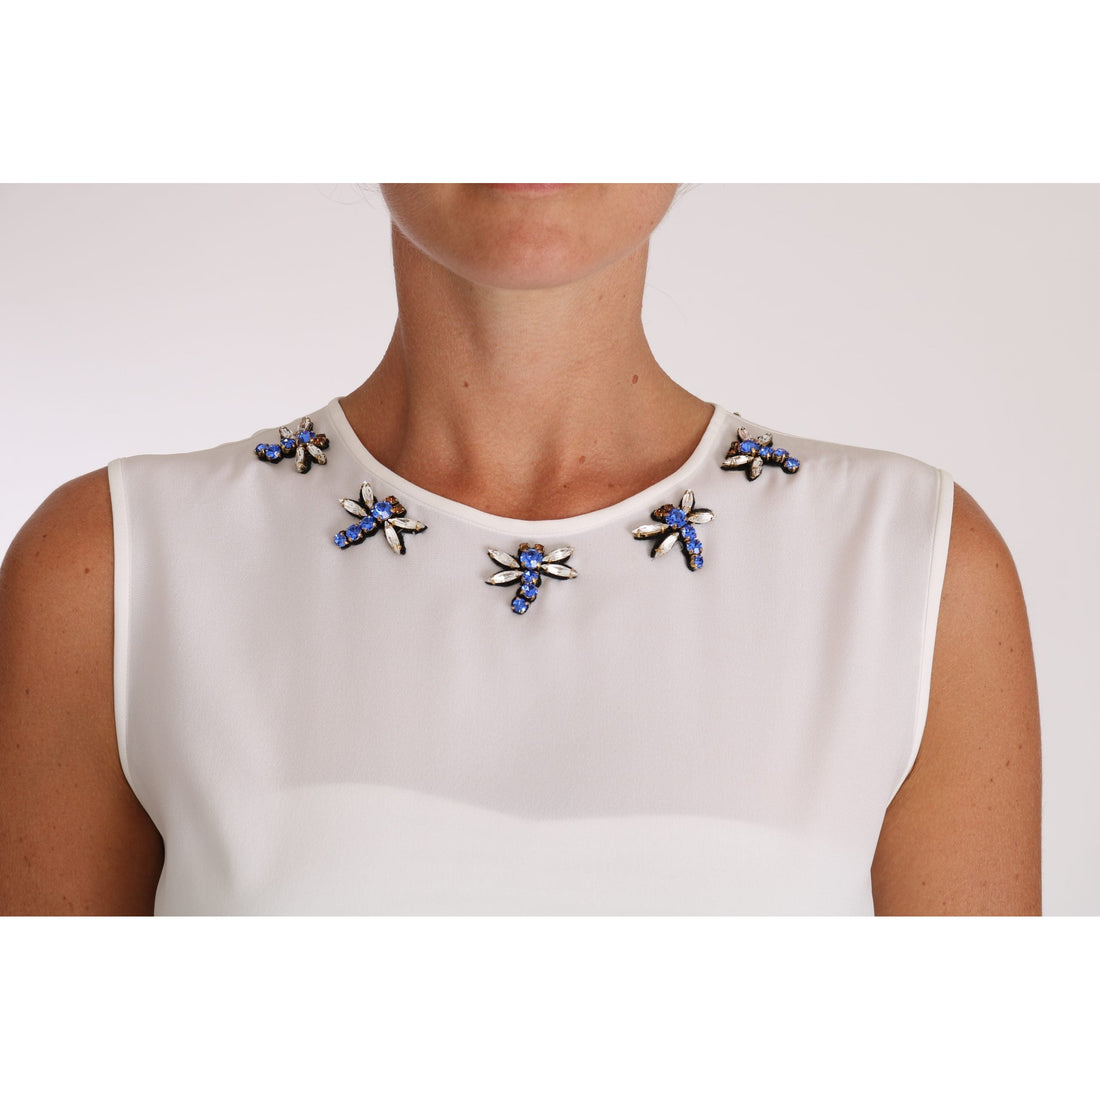 Dolce & Gabbana White Silk Crystal Embellished Fly T-shirt - Paris Deluxe